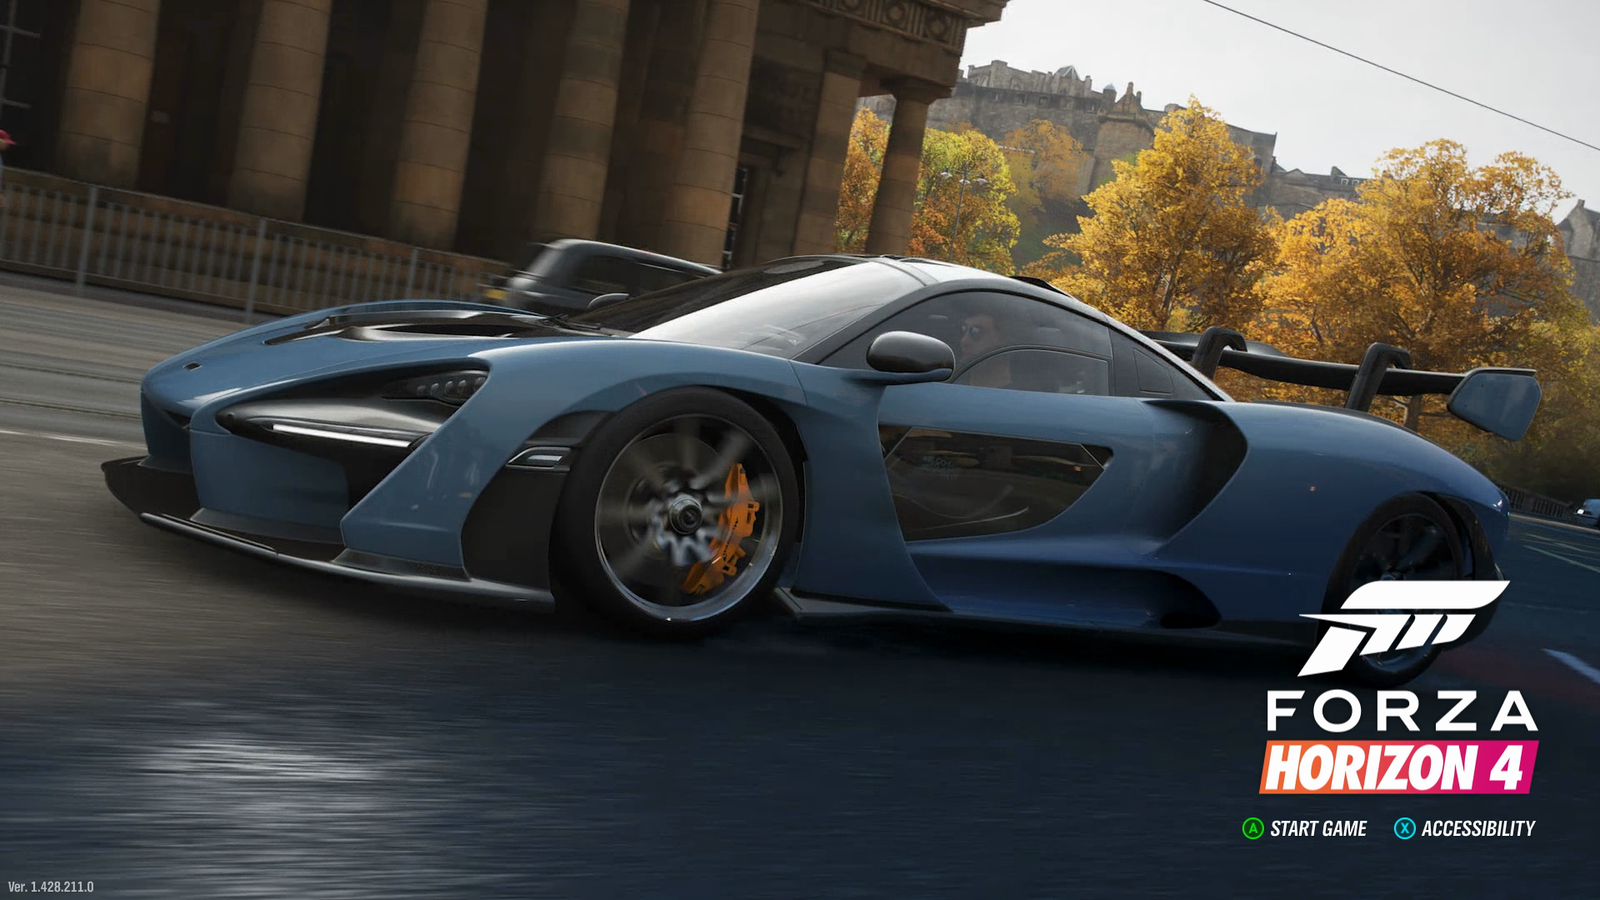 A screenshot of the title screen for Forza Horizon 4. "A - Start Game" and "X - Accessibility" are displayed on the bottom-right corner of the screen.